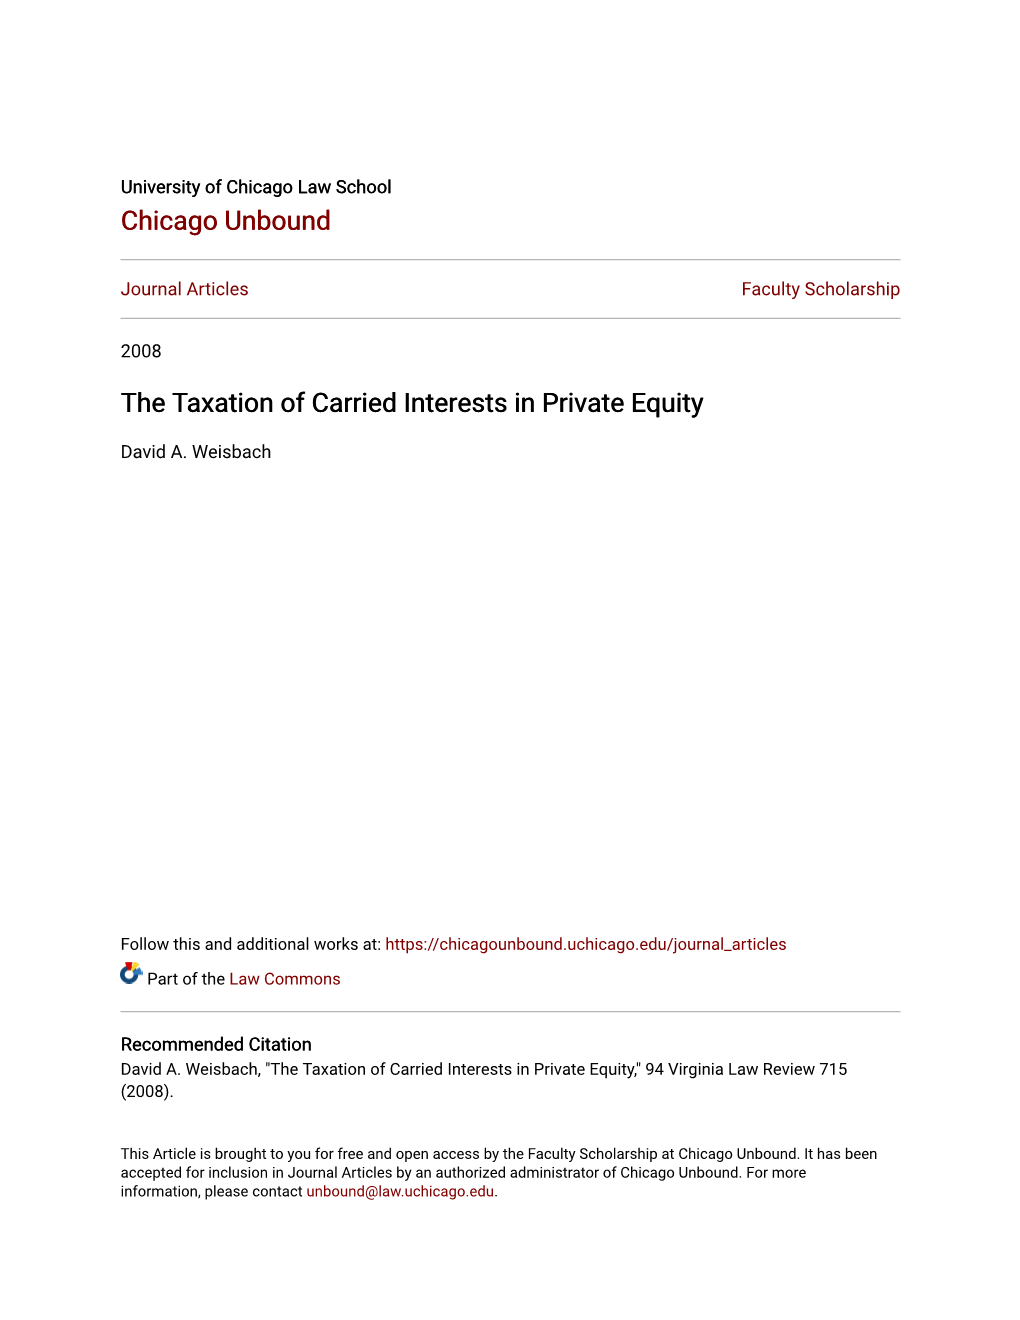 The Taxation of Carried Interests in Private Equity